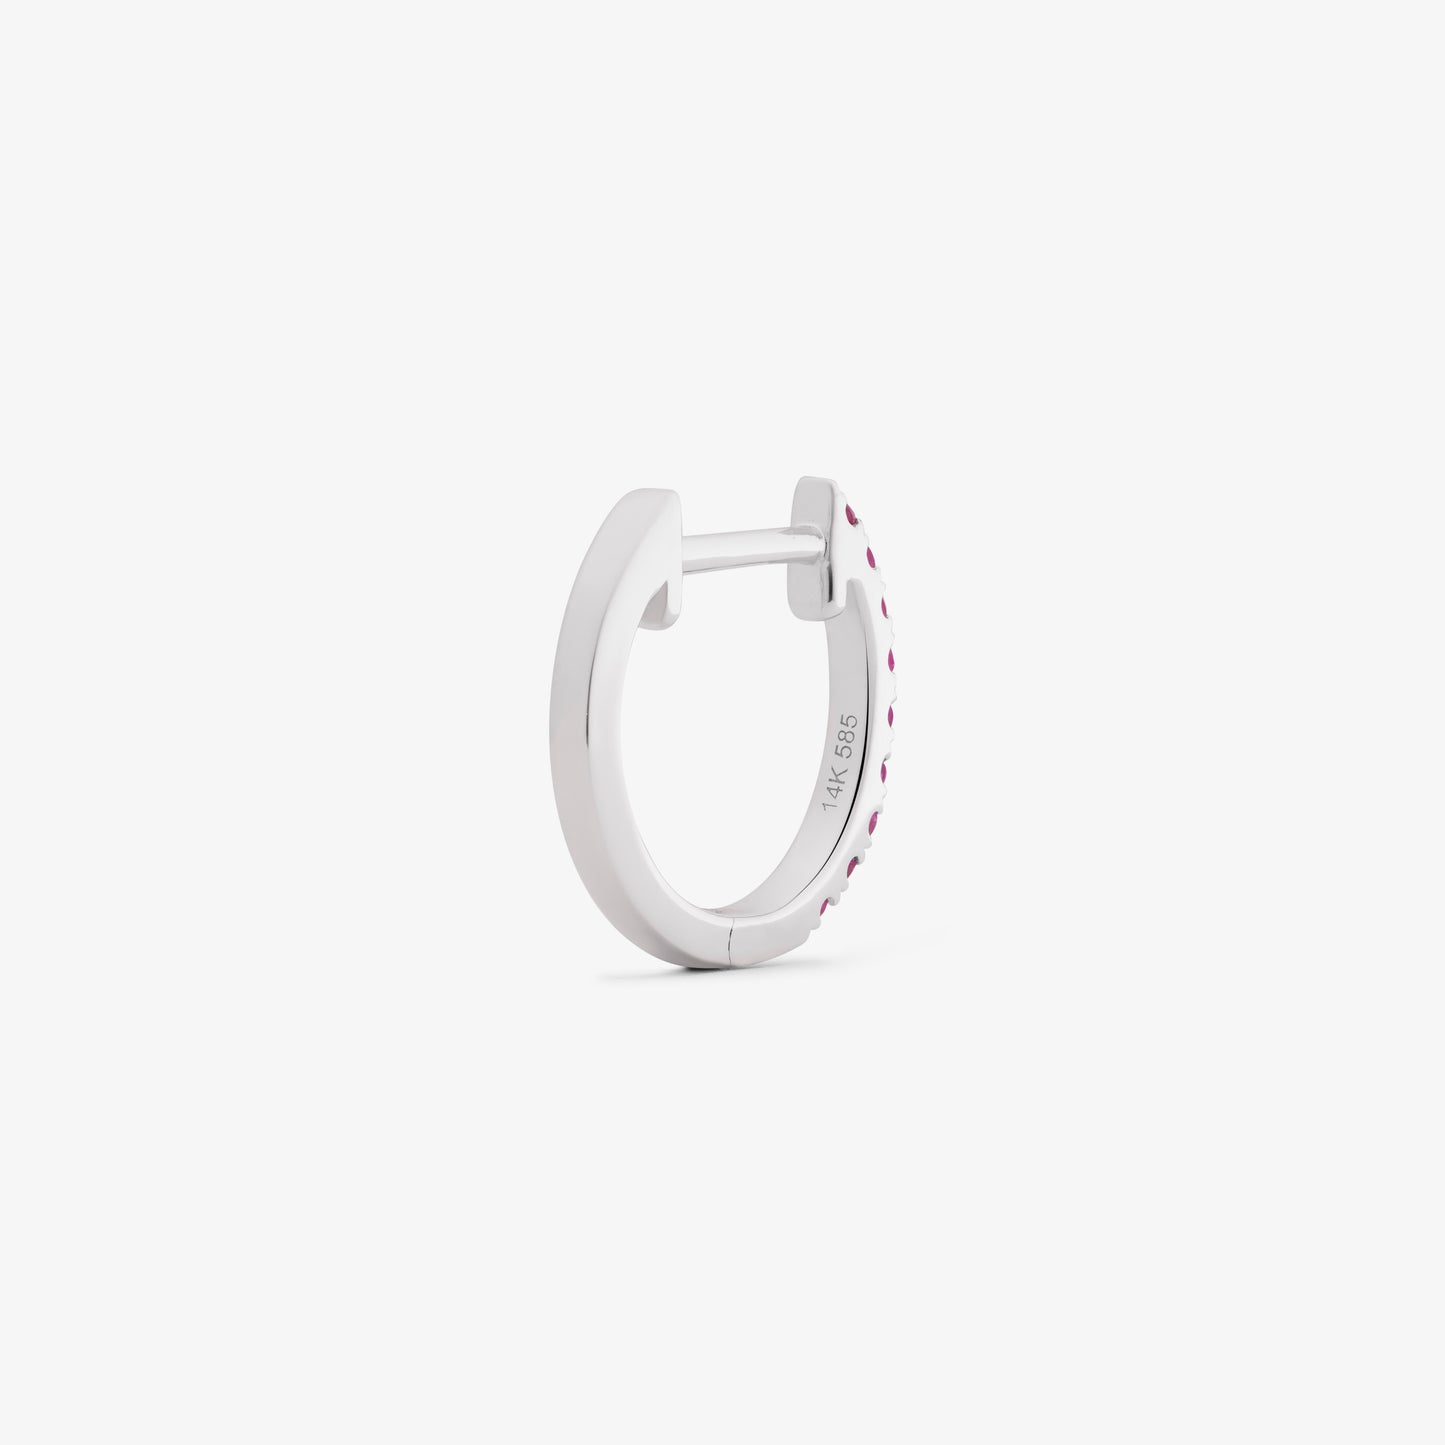 HOOP PINK SAPPHIRE & WHITE GOLD - 10mm